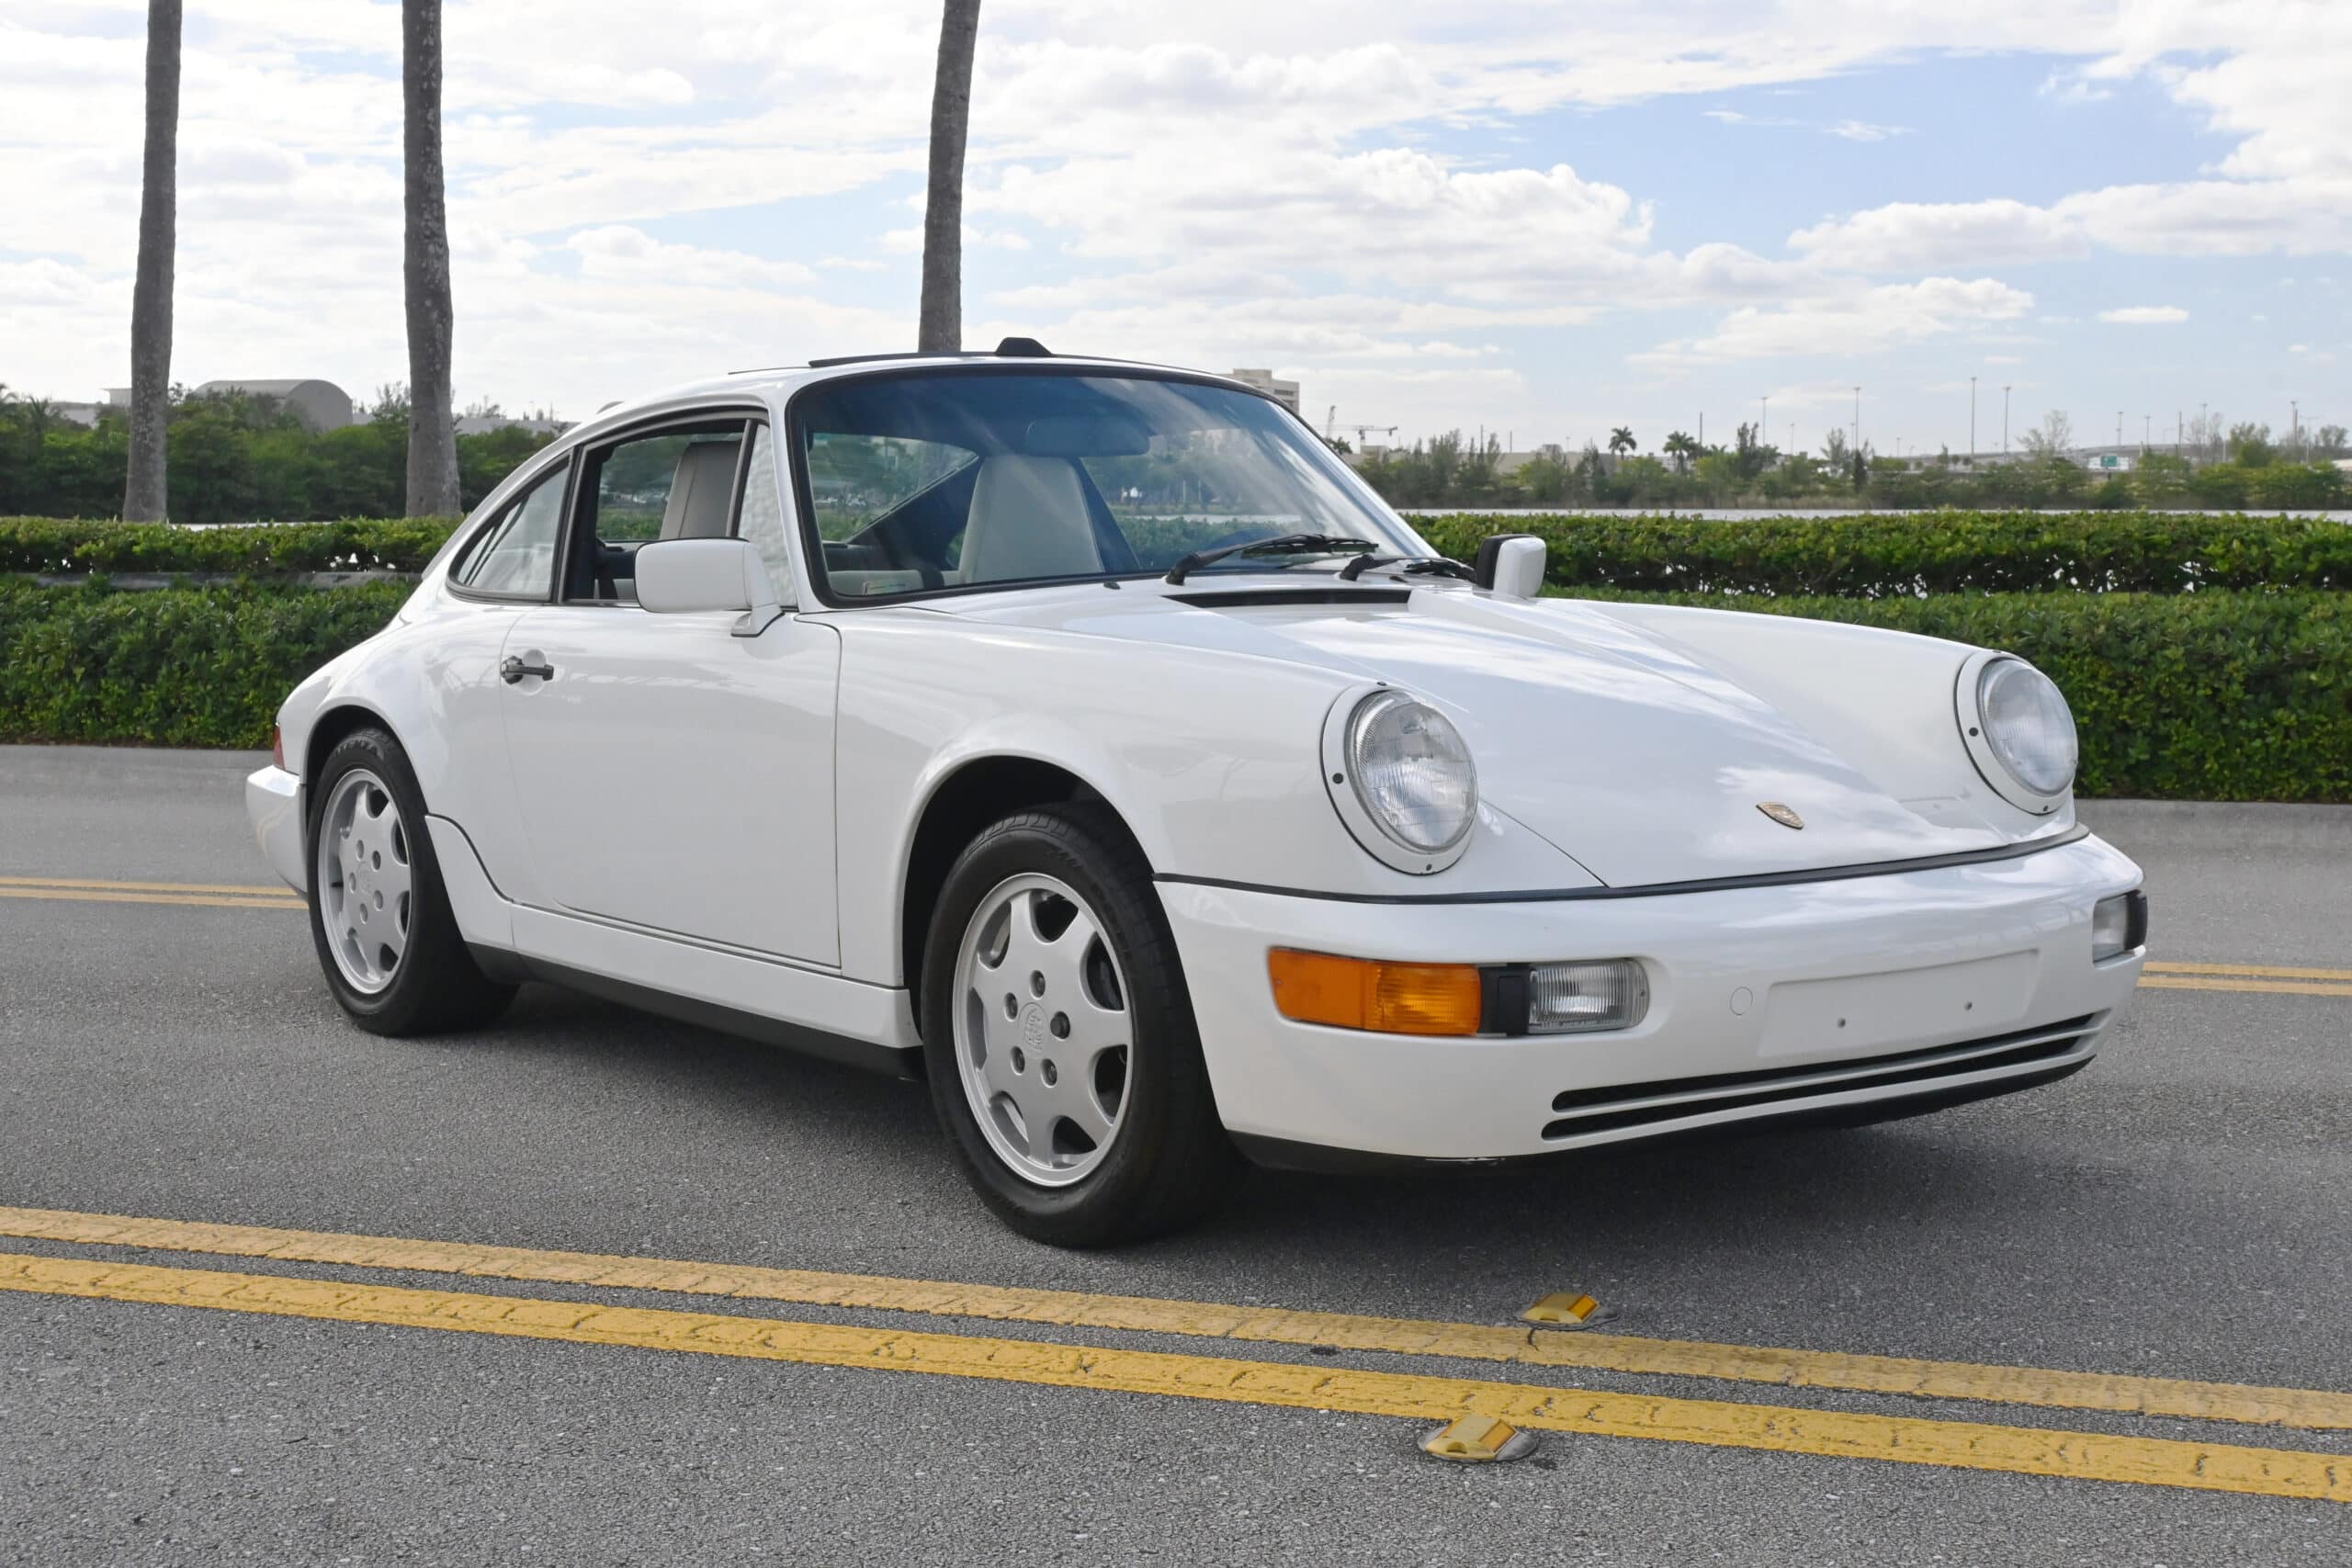 1990 964 Carrera 4, Rare white on white color combo, Two owner, Verified 50K Actual Miles, all original unmolested